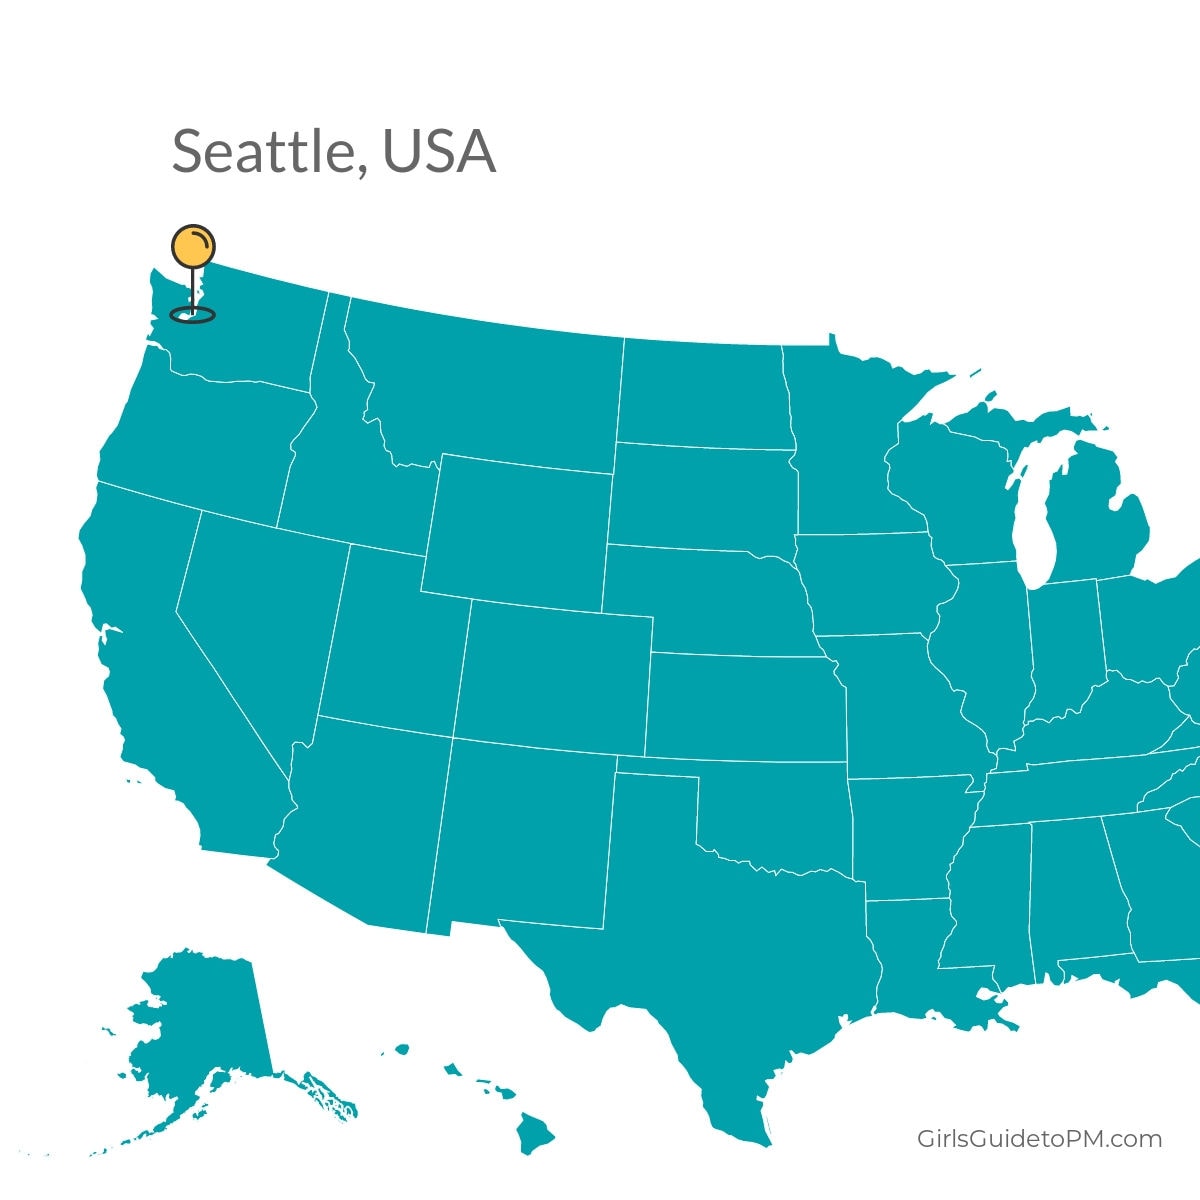 Map of USA with a pin in Seattle